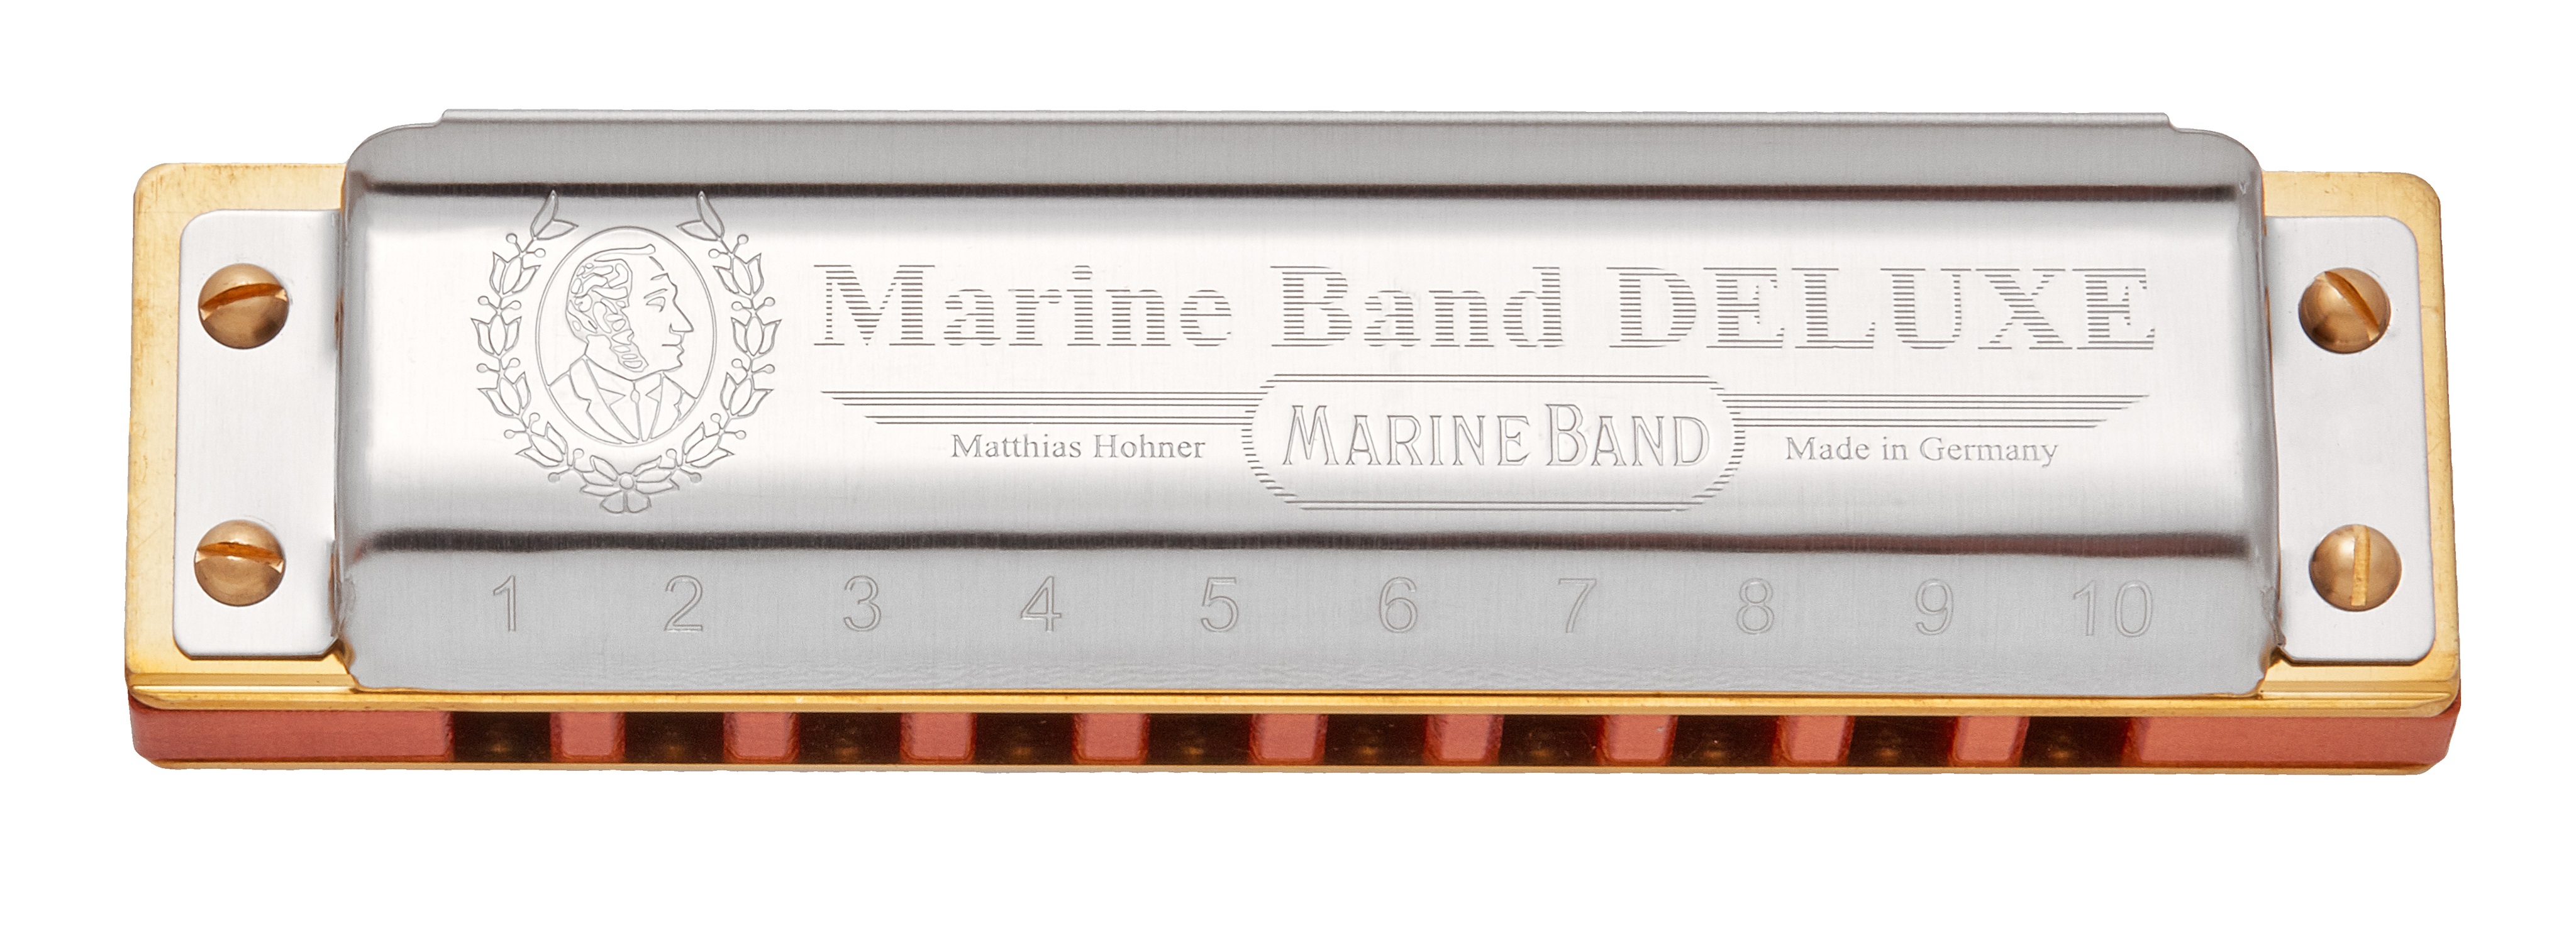 Fotografie Hohner Marine Band Deluxe Ladění: A Hohner A130:13146_5509